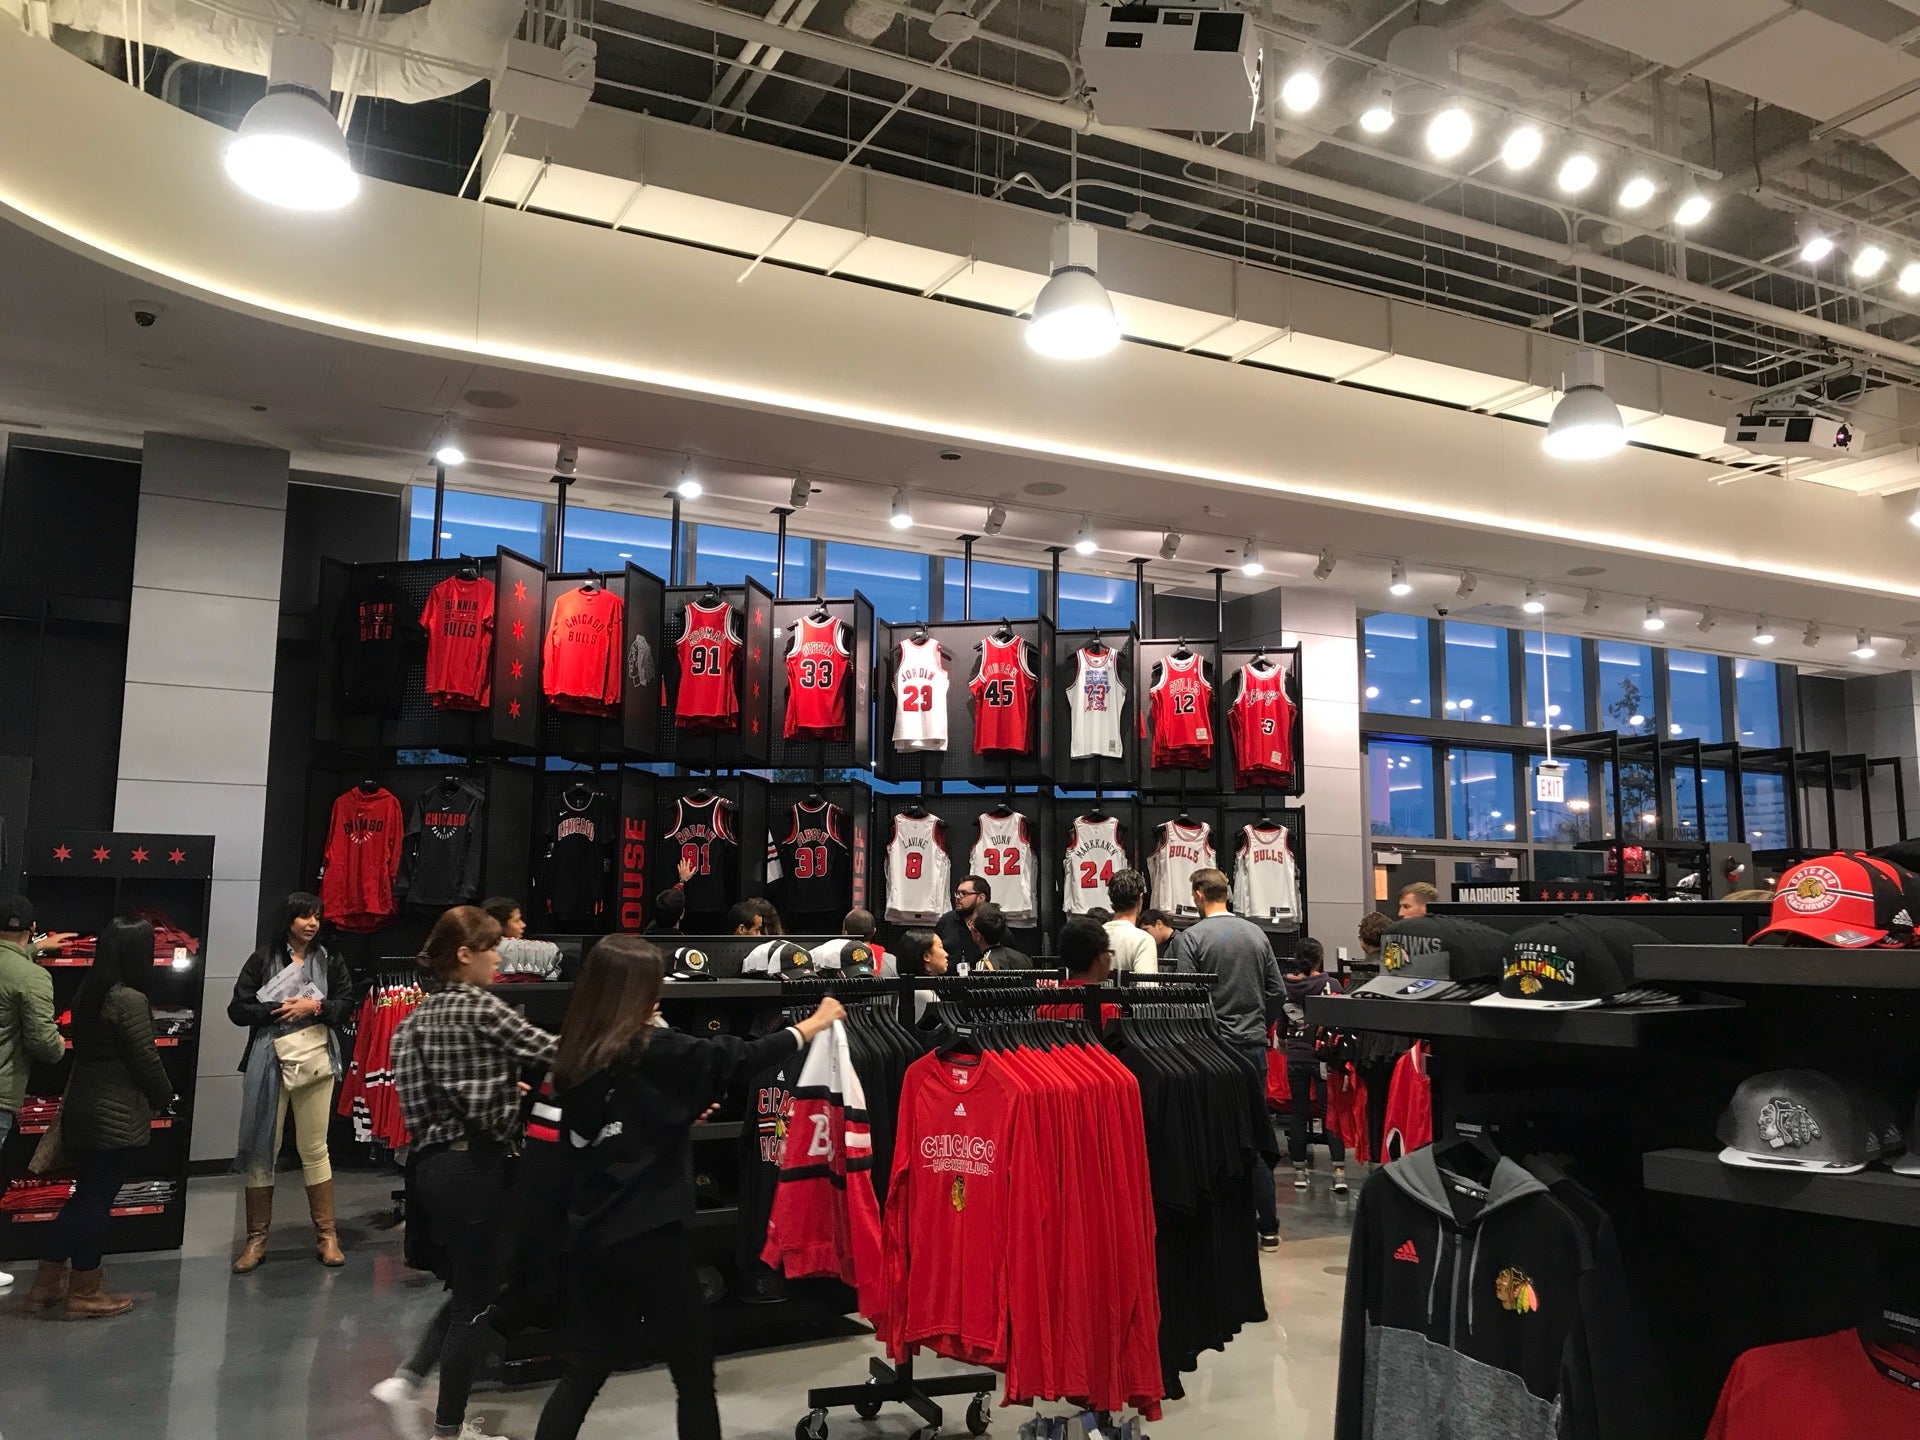 Madhouse Team Store, 1901 W Madison St, Chicago, IL, Services NEC - MapQuest